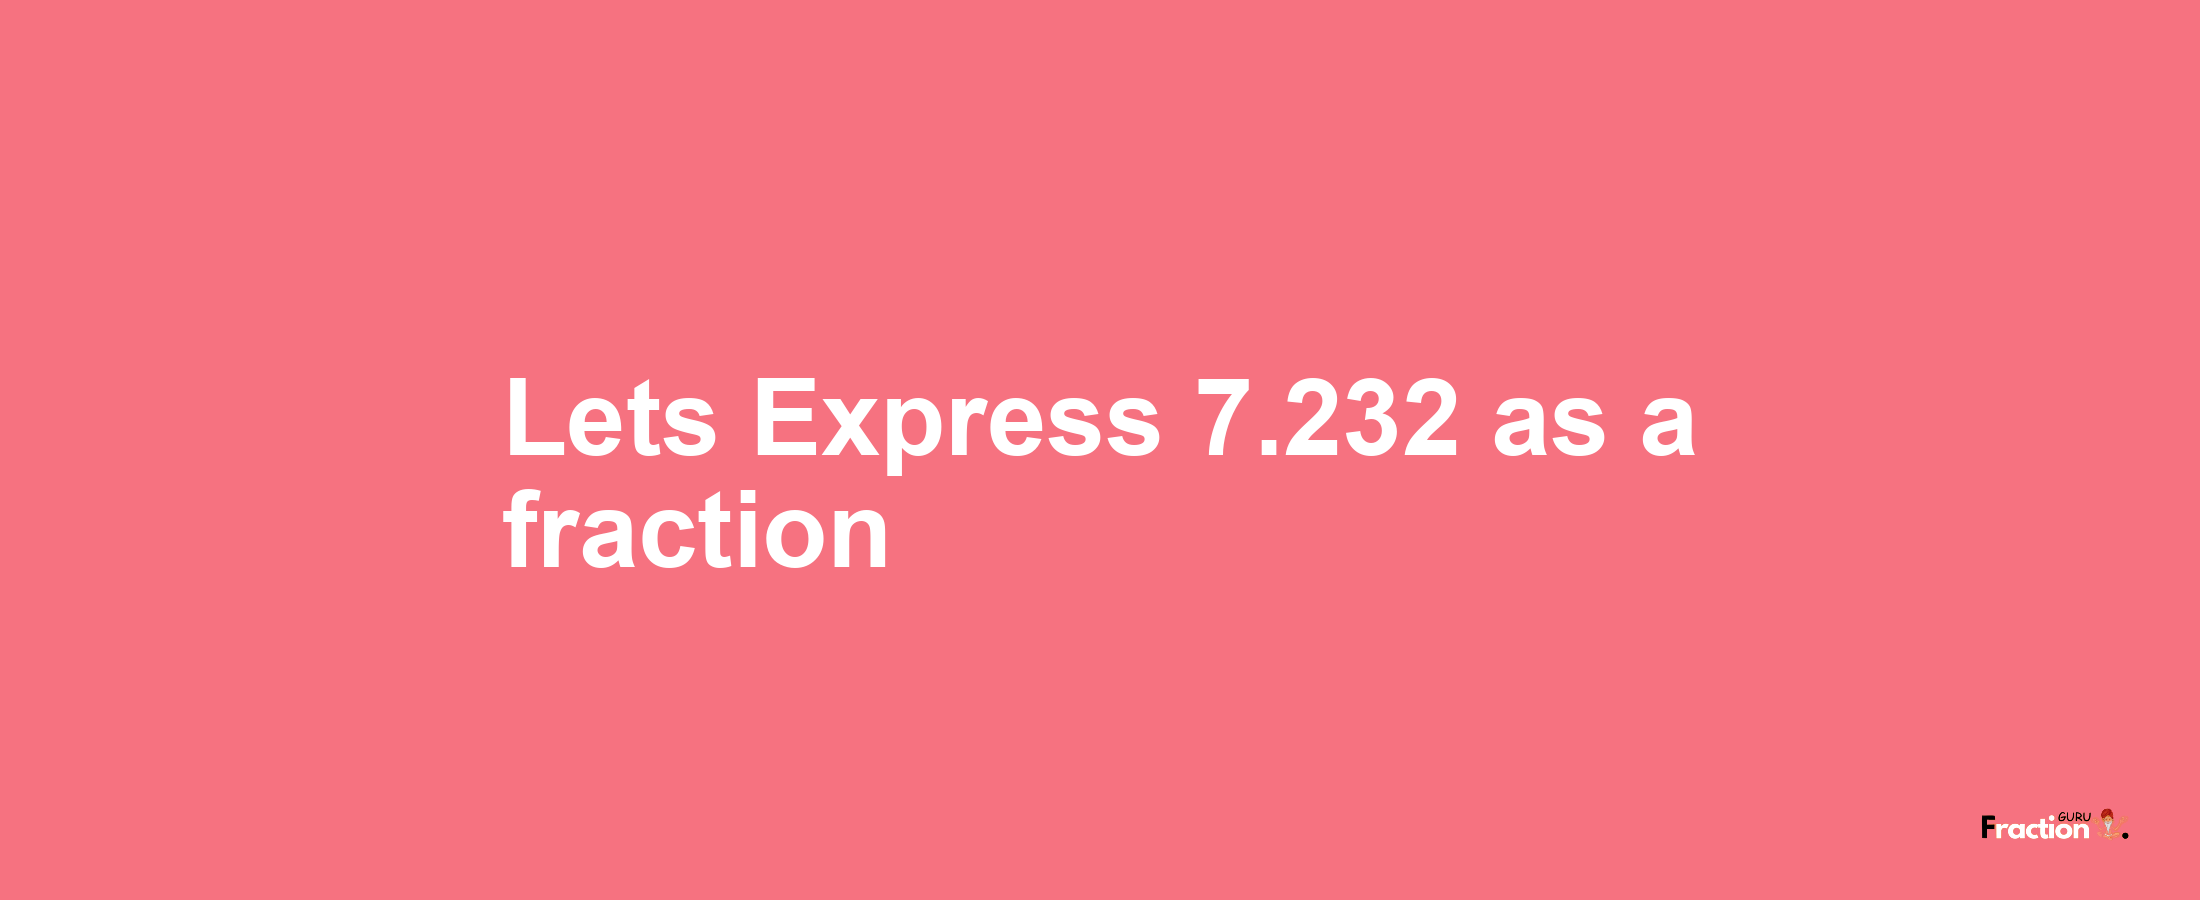 Lets Express 7.232 as afraction